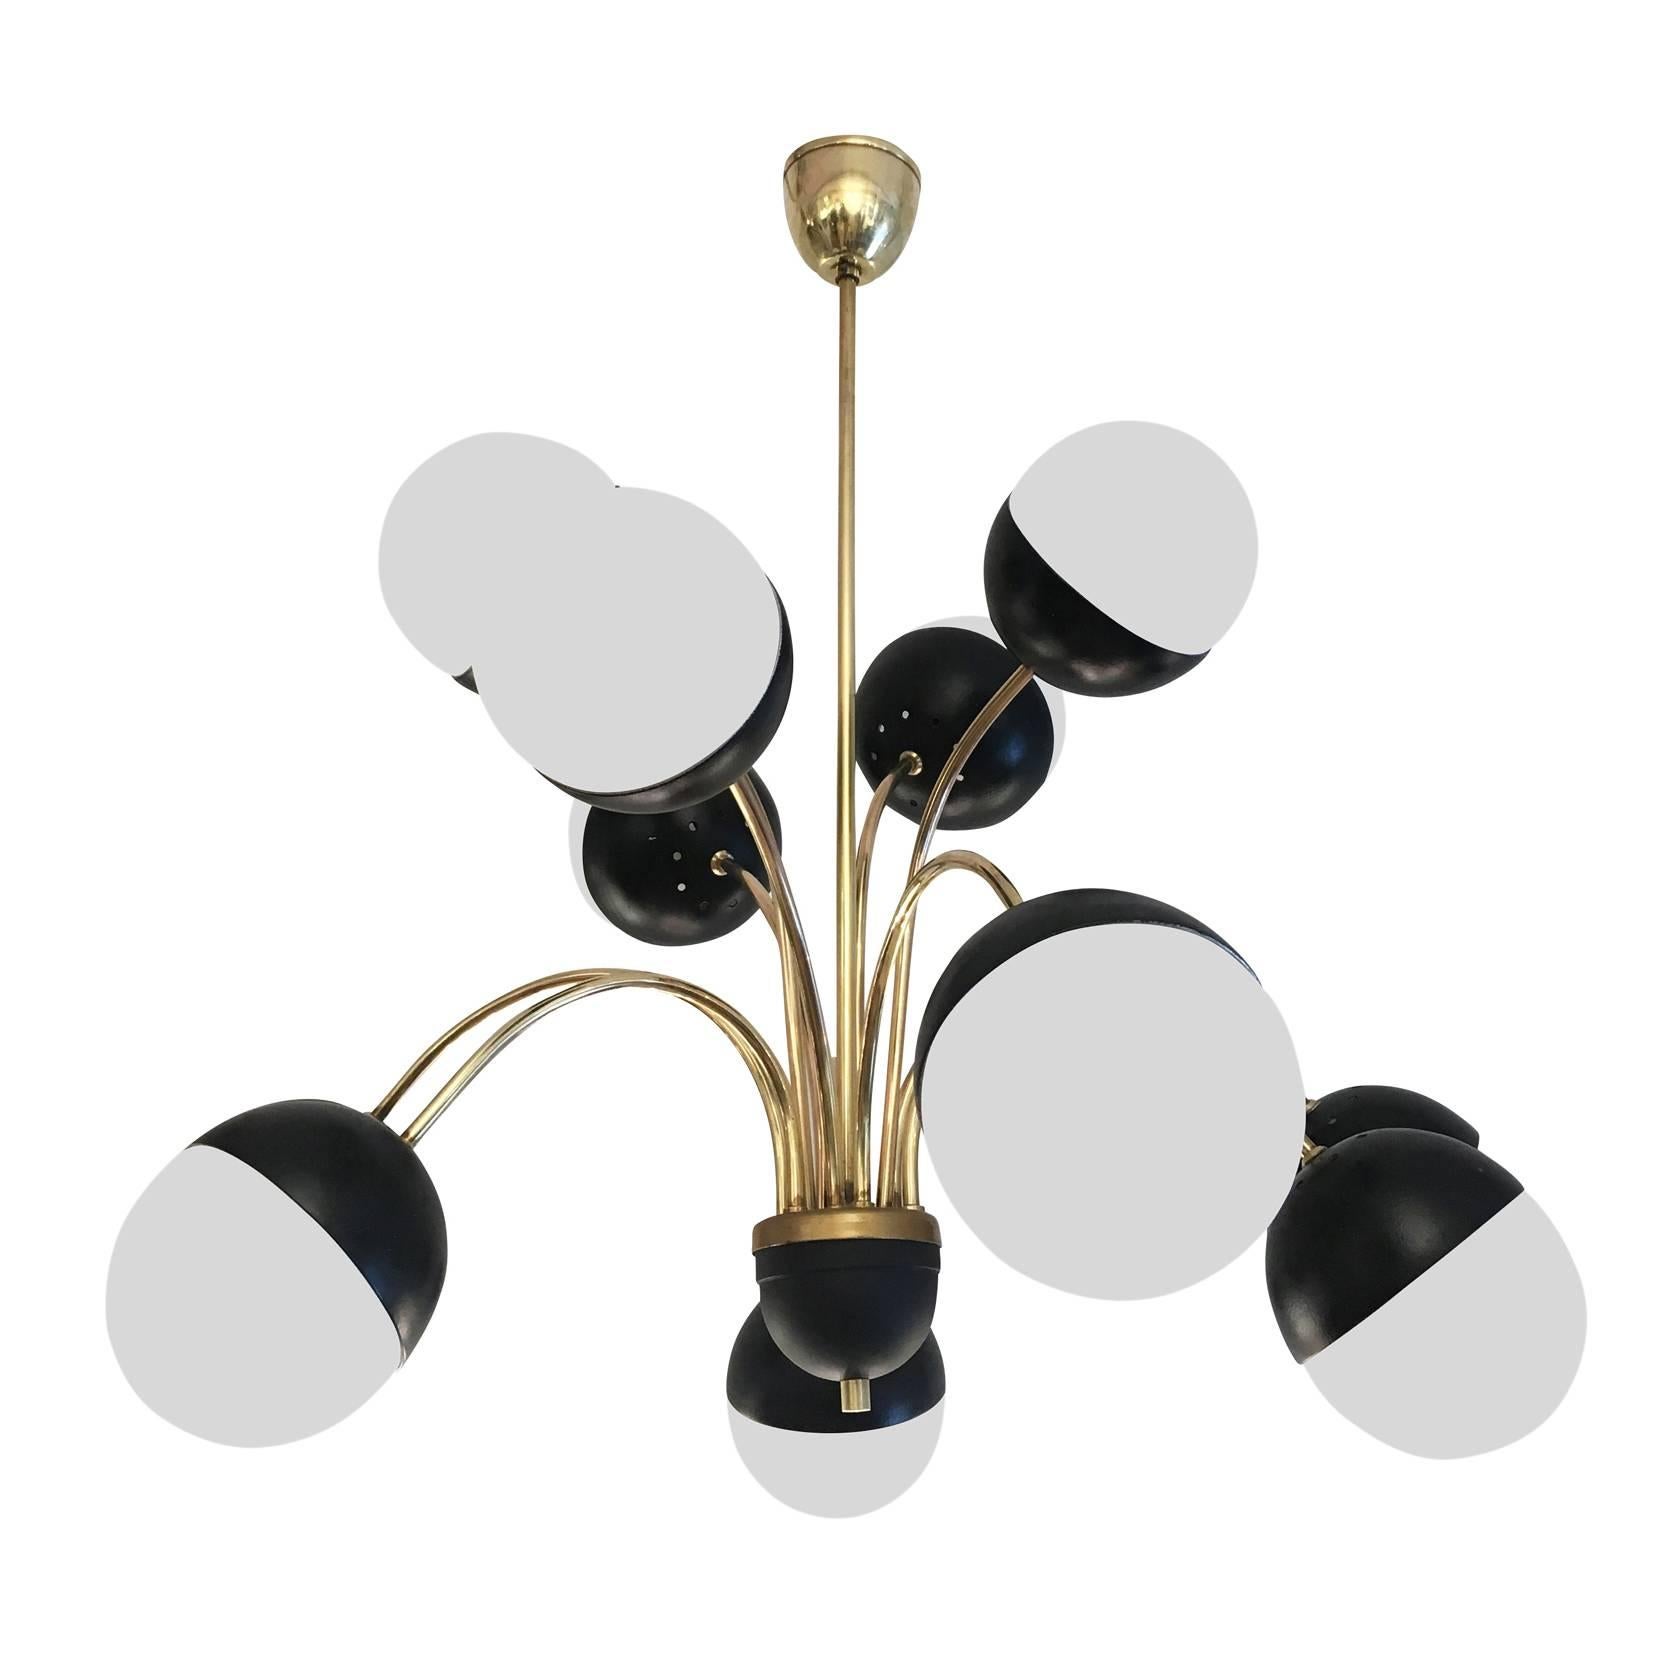 Beautiful chandelier featuring an irregular cascade of eleven white frosted glass globes. The brass structure and the arms are from 1950s while the aluminum and glass shades were a later addition. Holds eleven candelabra sockets.